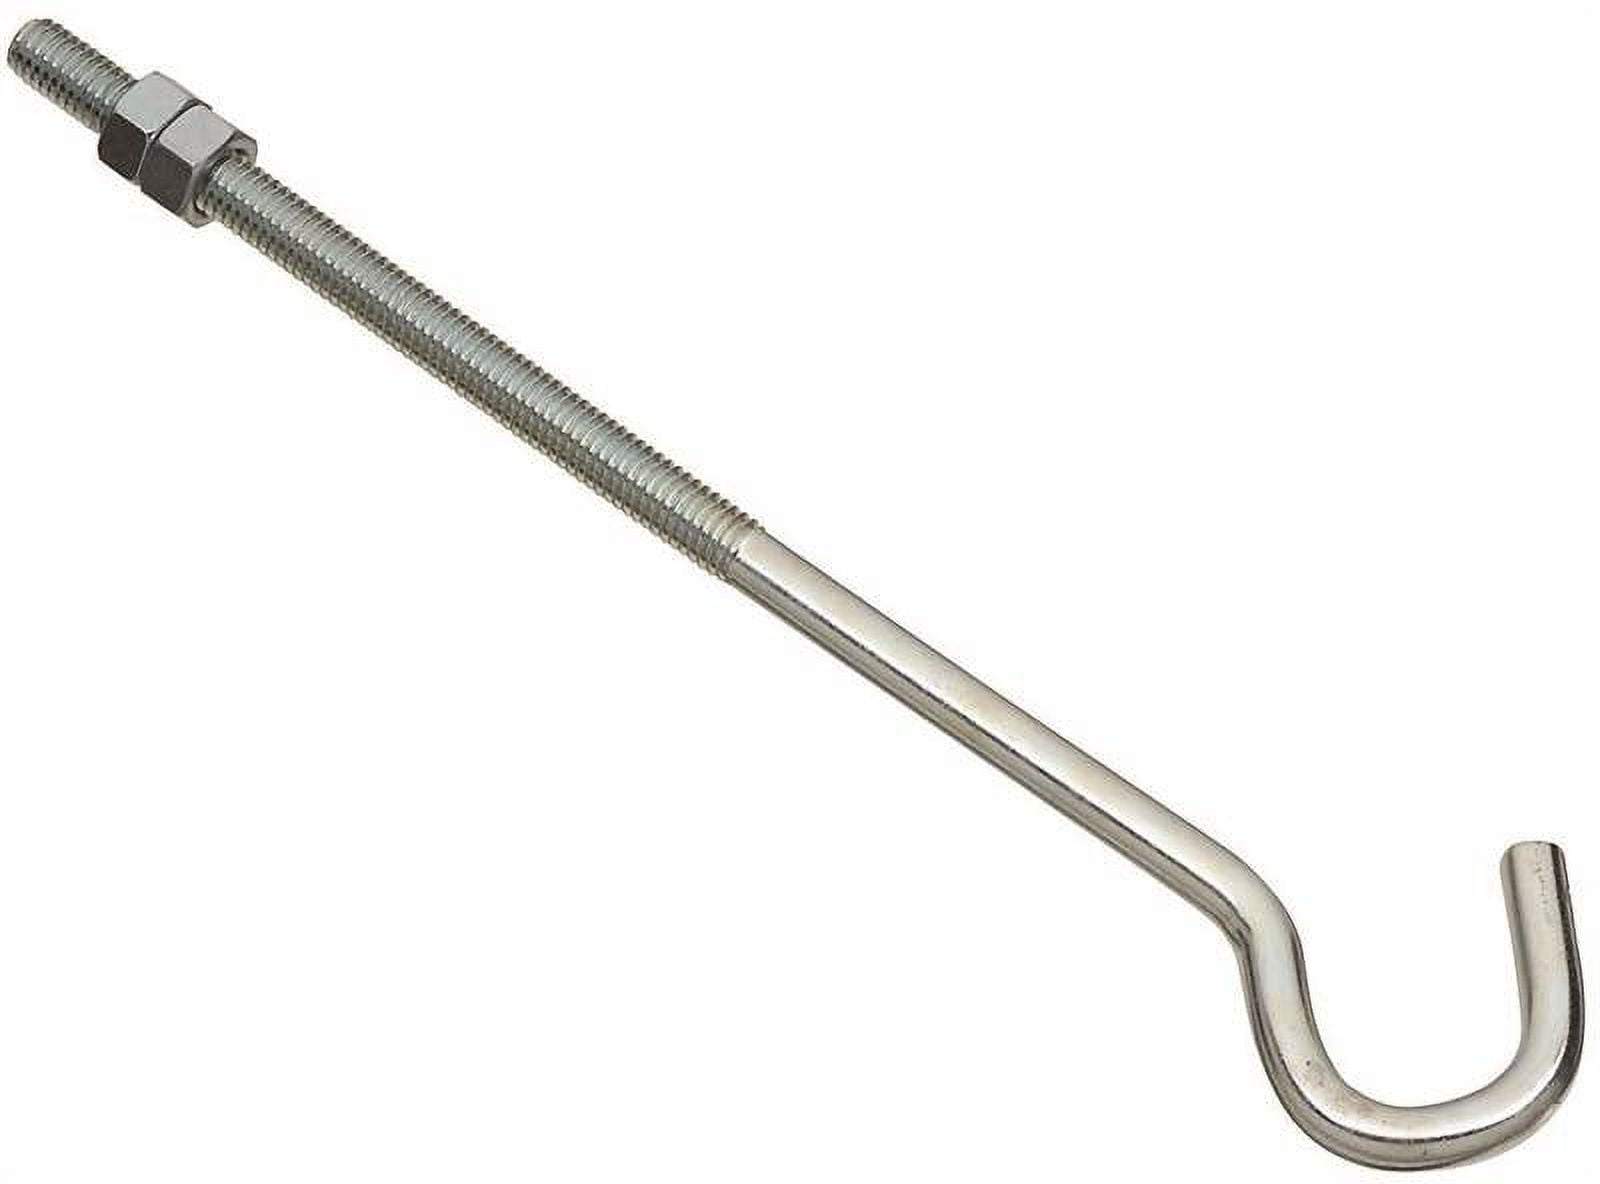 1 inch x 1 1/4 inch Stainless Steel Bolt on D-Ring Rated to 1,200lbs